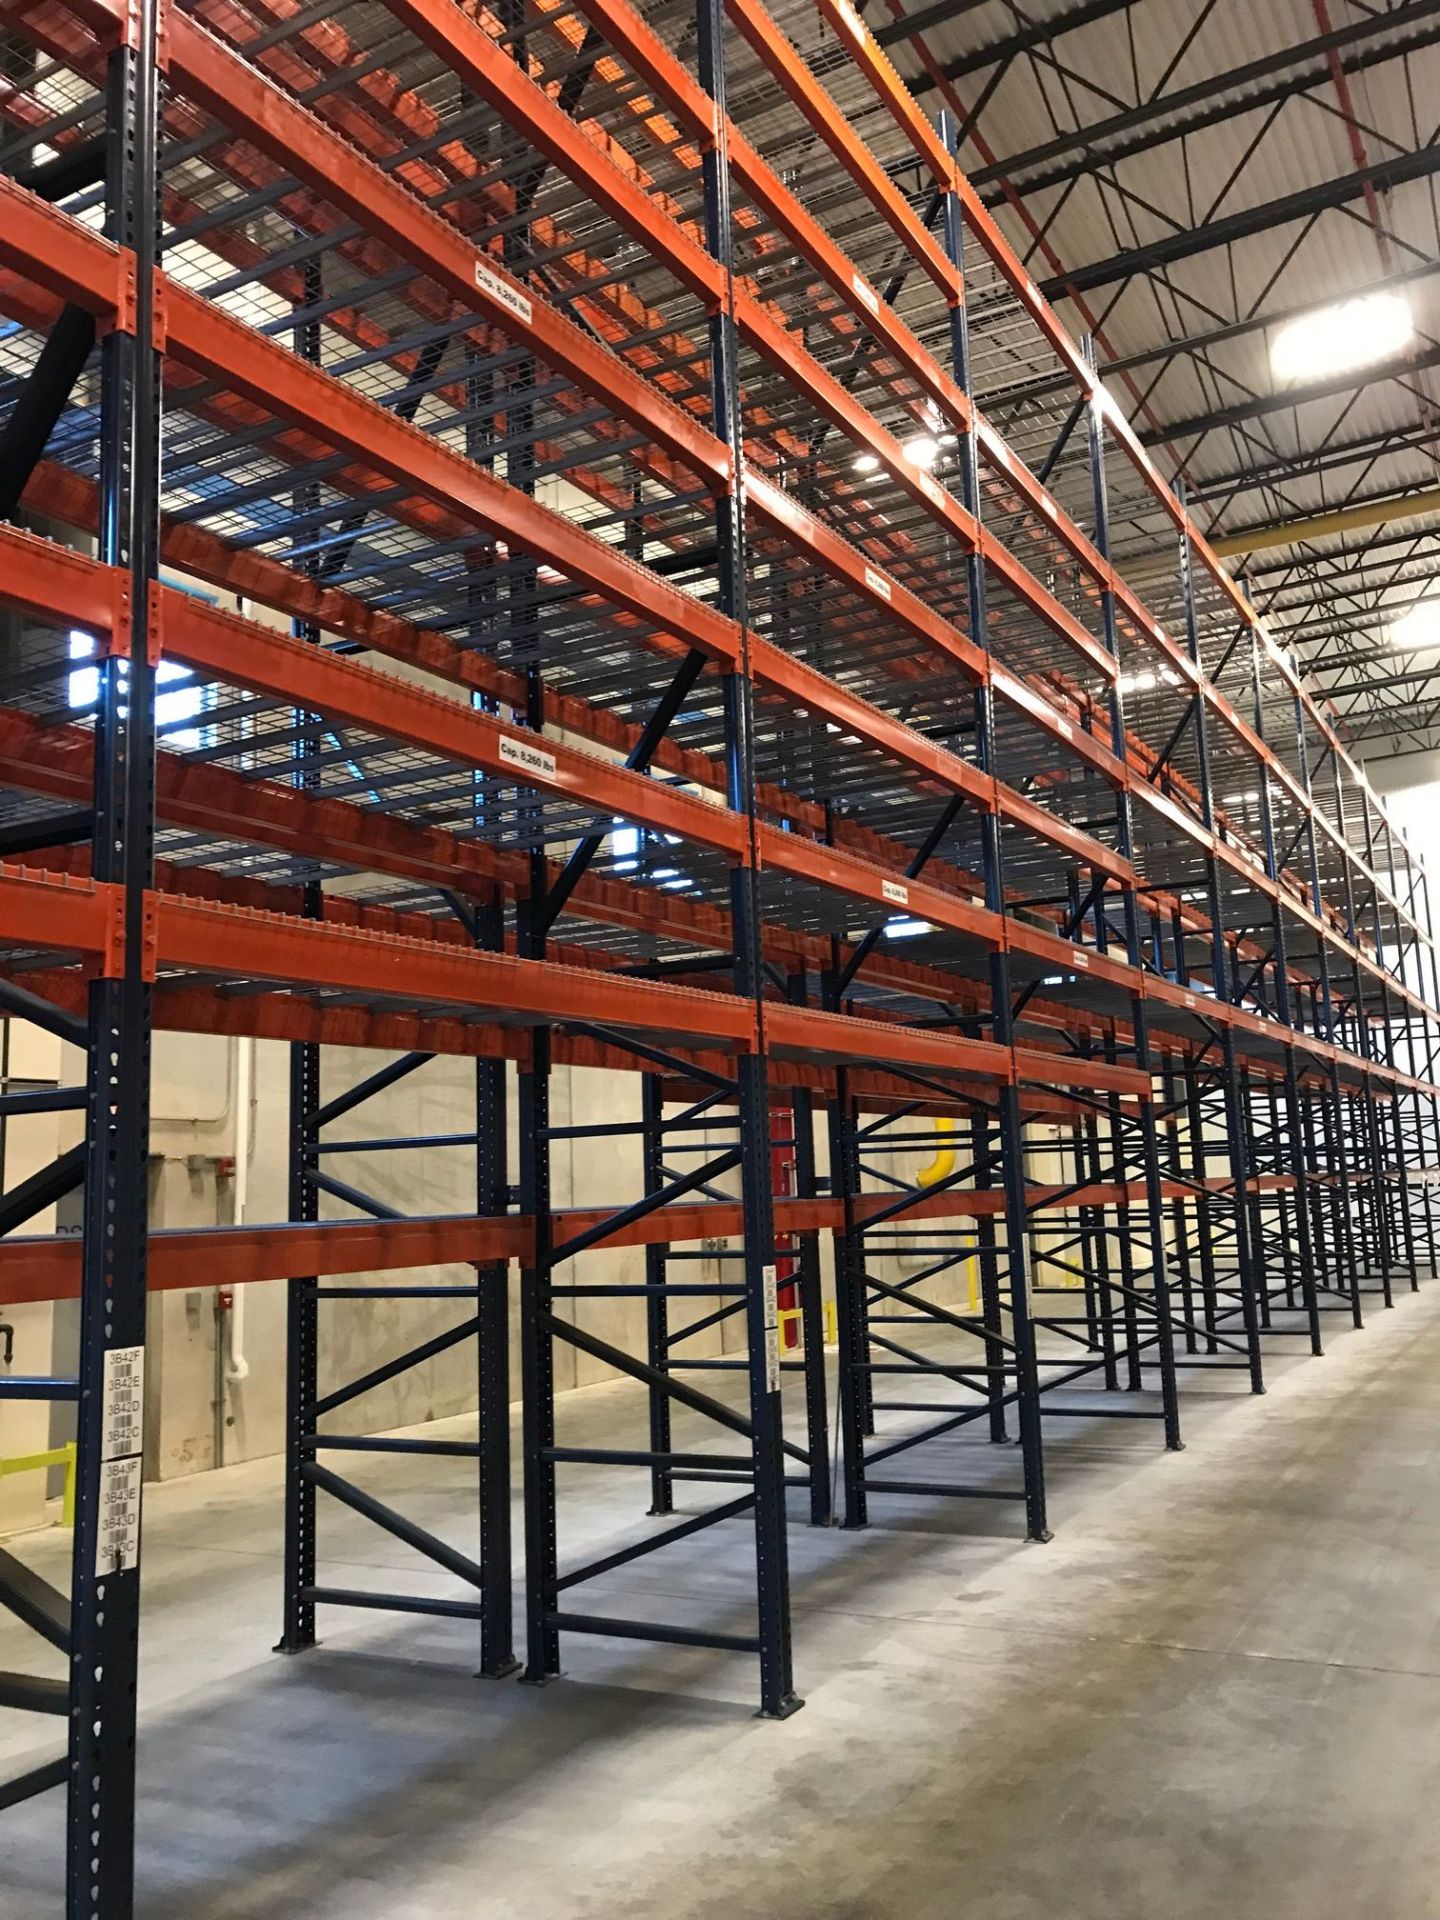 SECTIONS 108" LONG X 42" WIDE X 288" HIGH TEARDROP TYPE ADJUSTABLE BEAM PALLET RACK WITH WIRE - Image 7 of 7